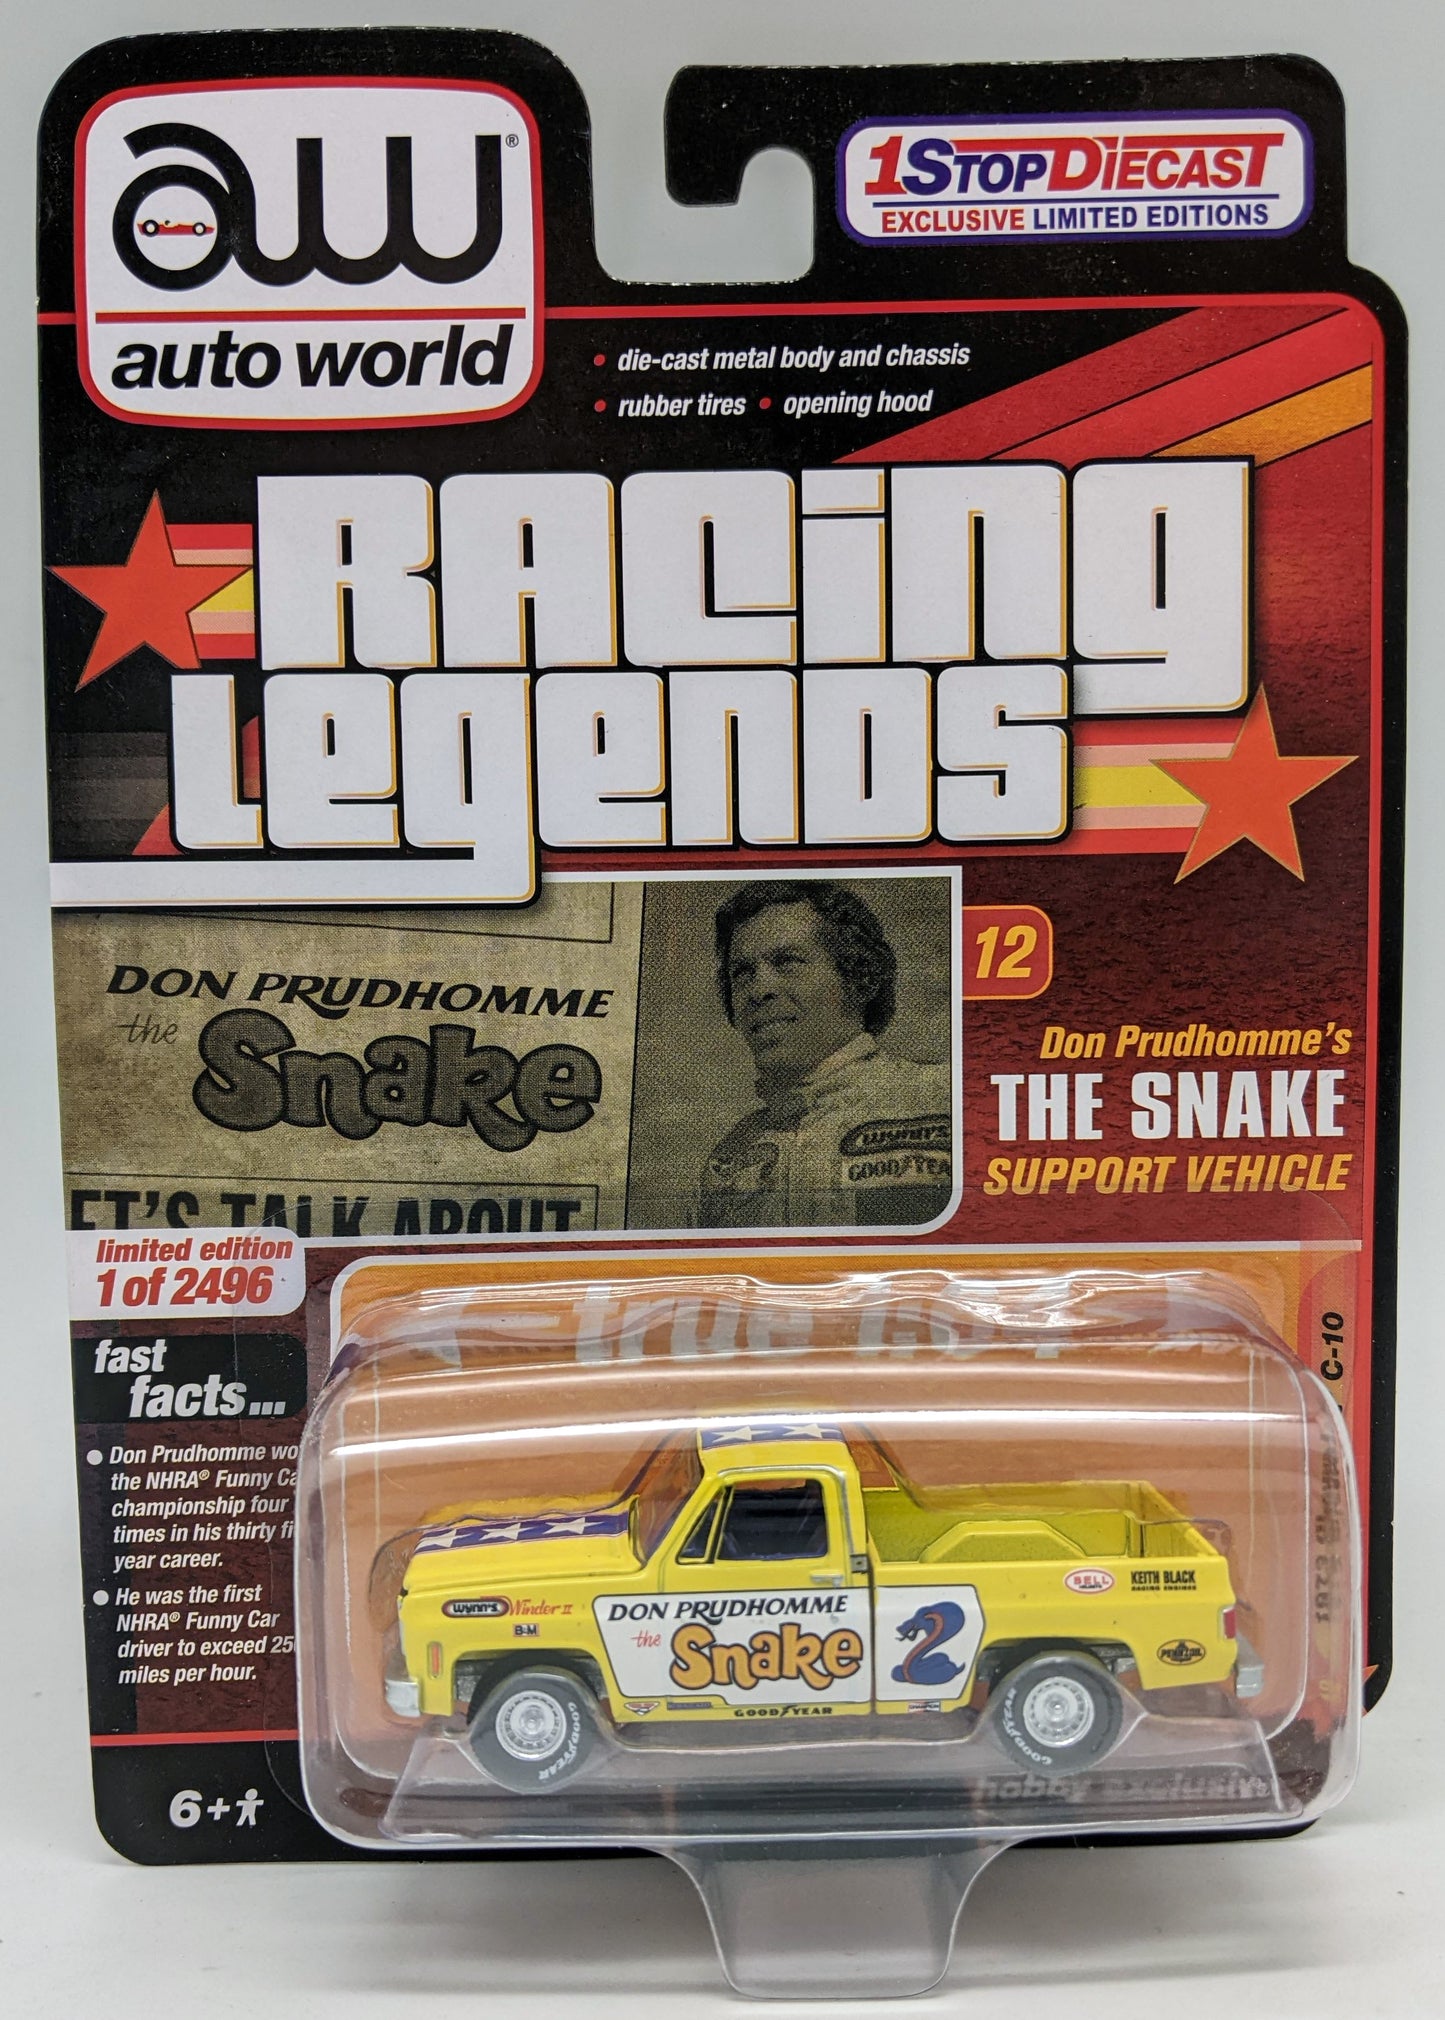 AW Racing Legends #12 "The Snake" Support Vehicle